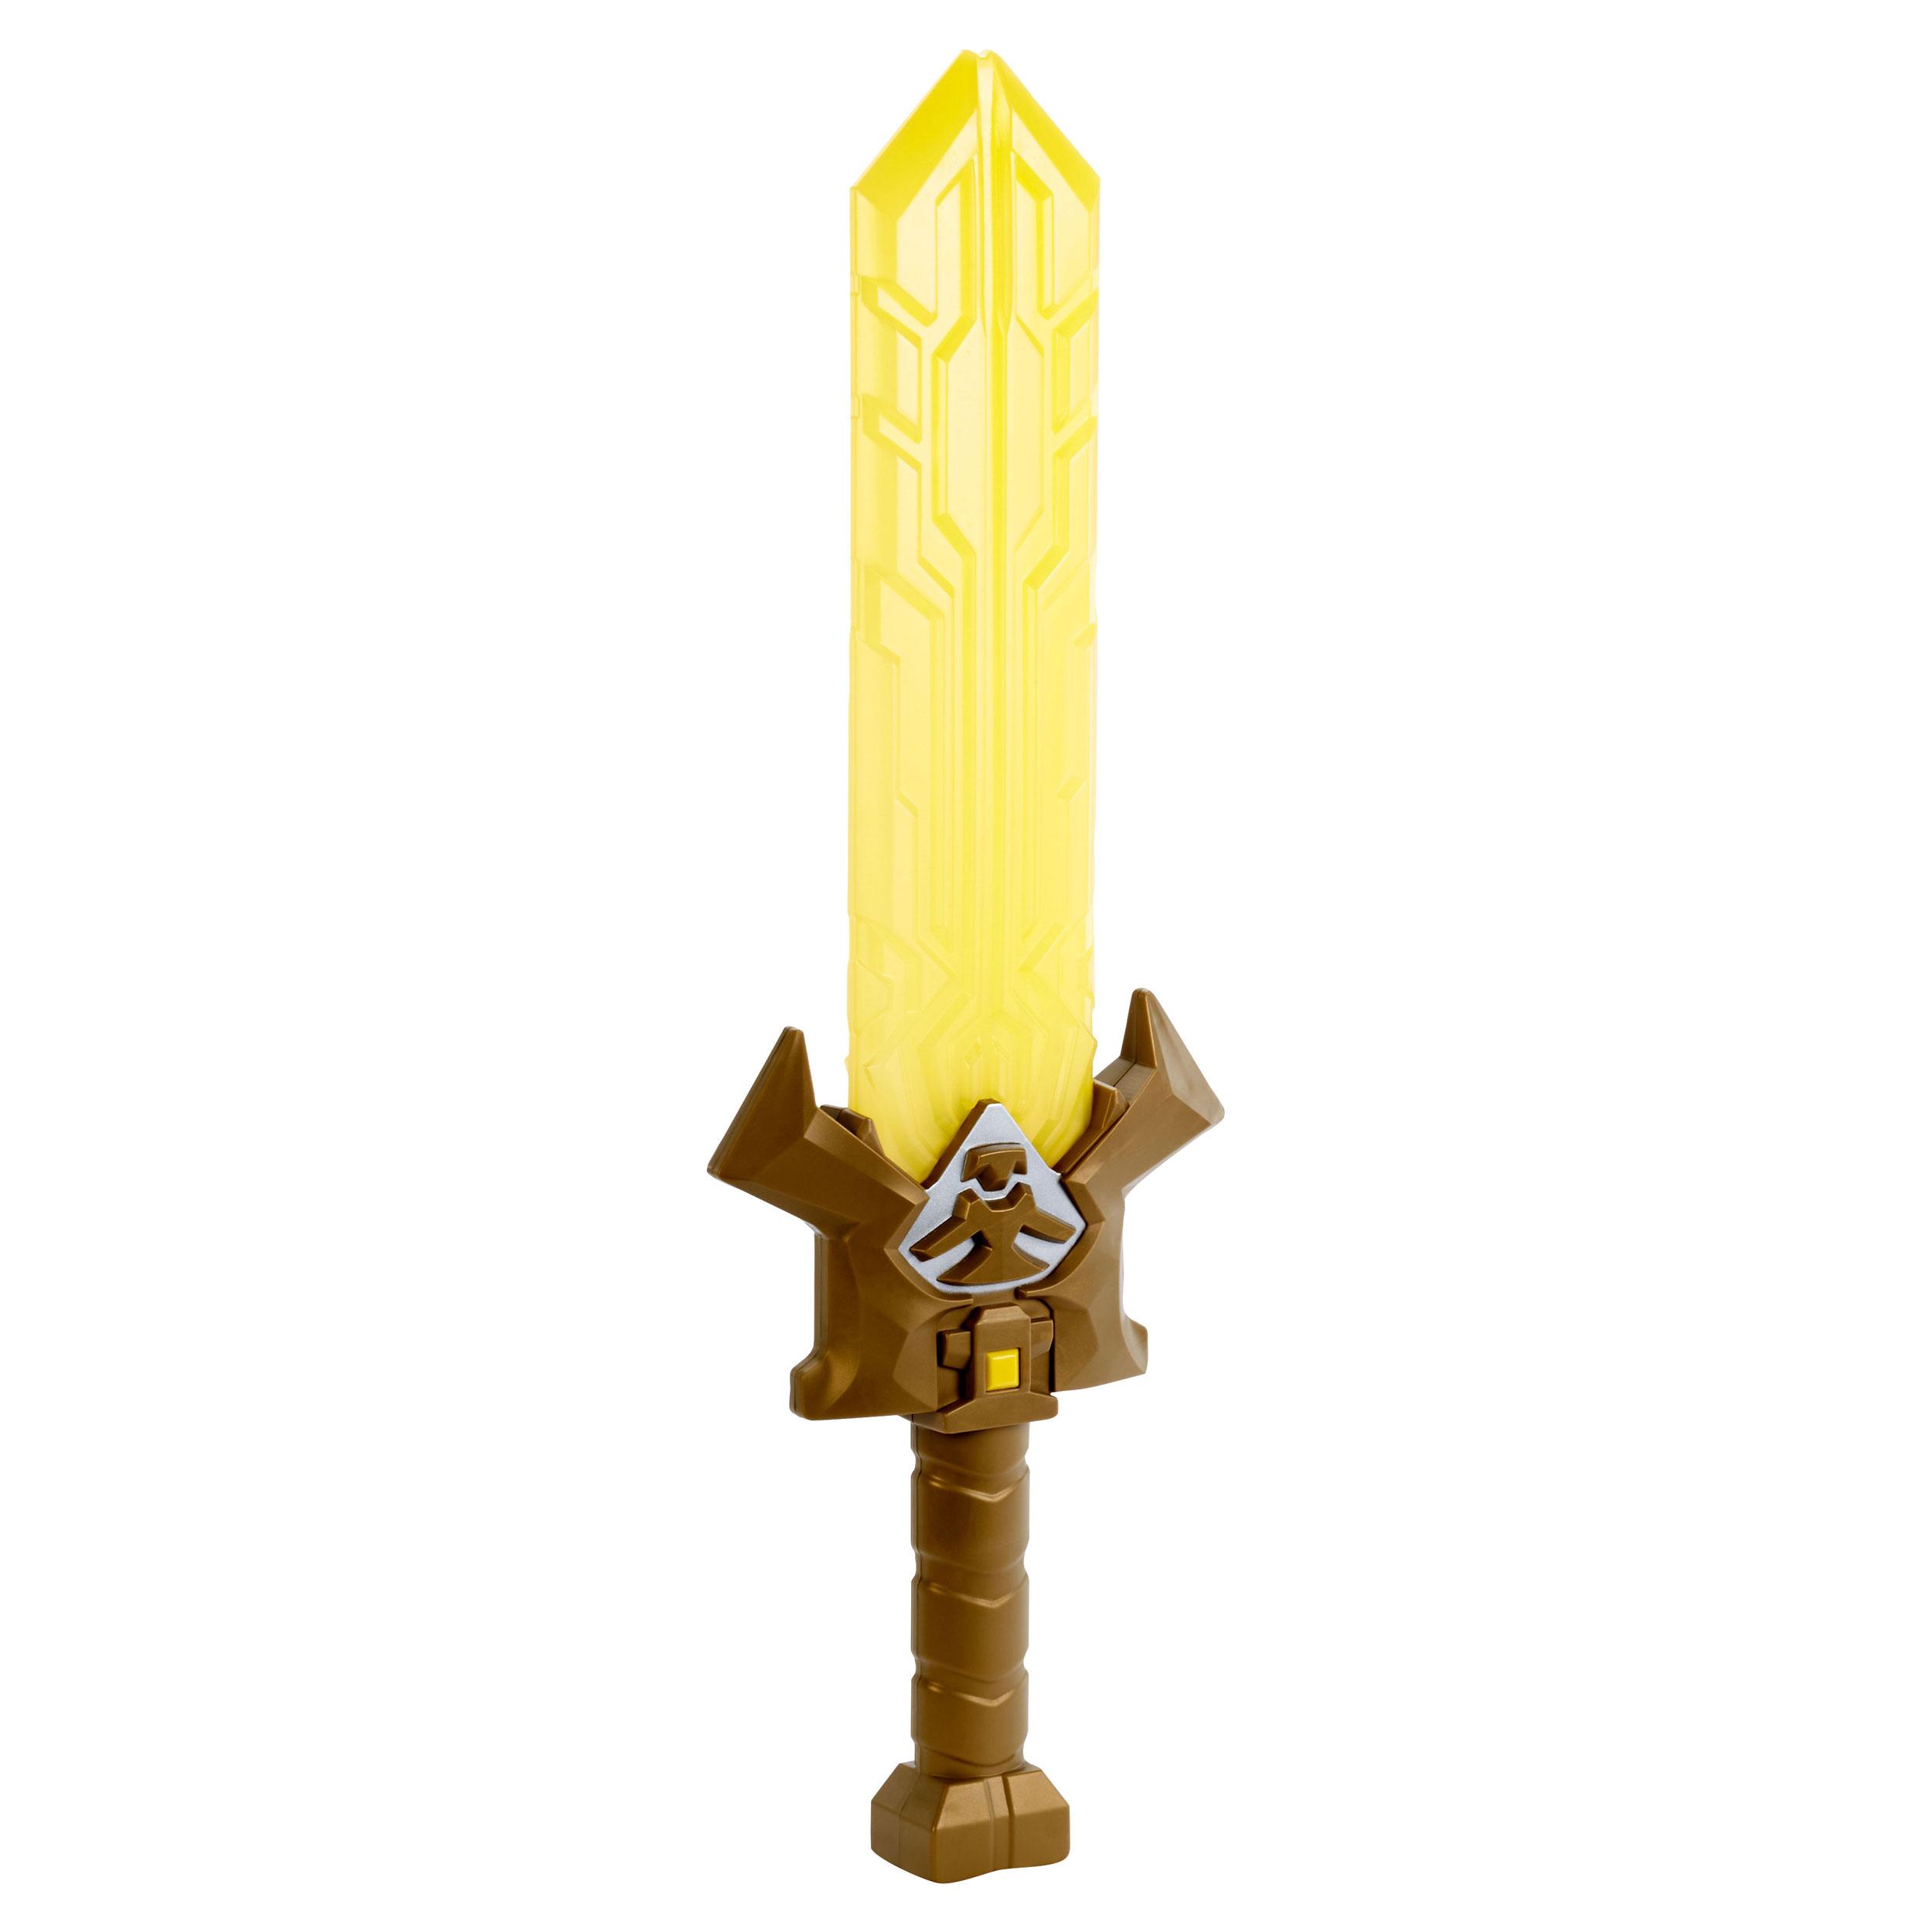 He-Man and the Masters of the Universe Power of Grayskull Deluxe Sword MATTHJG64 0194735085590